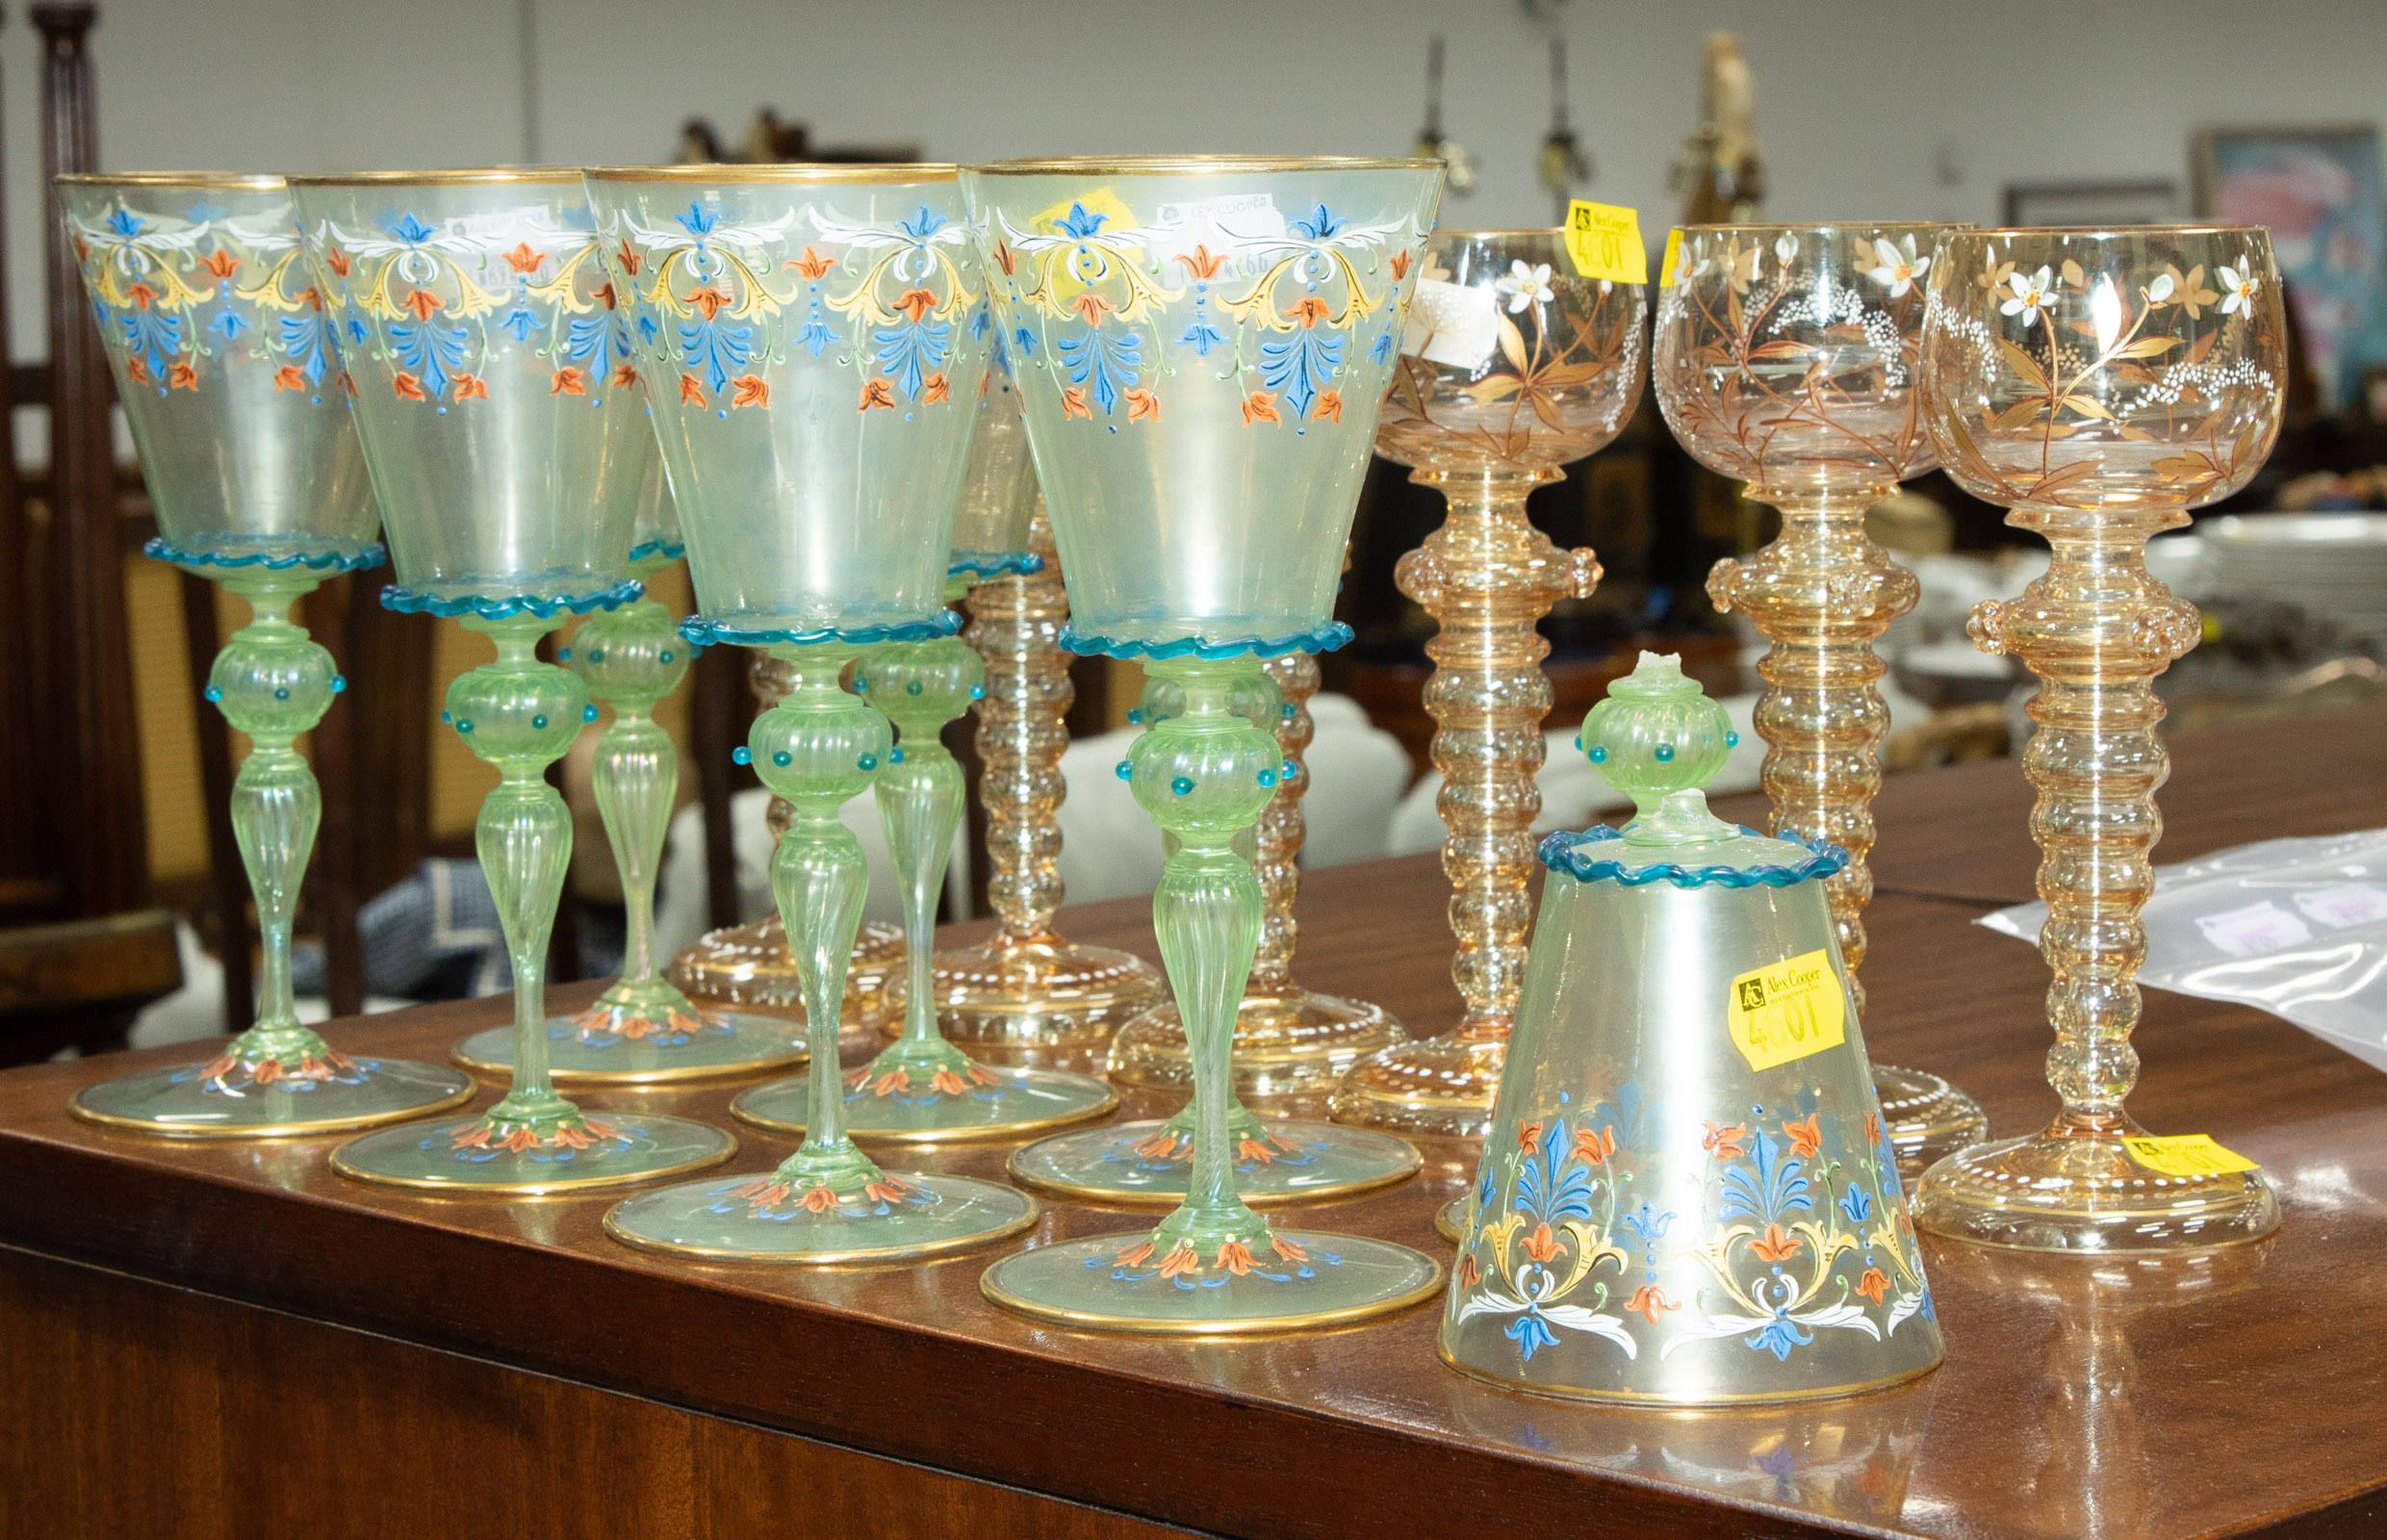 TWO GROUPS OF ENAMEL DECORATED STEMWARE